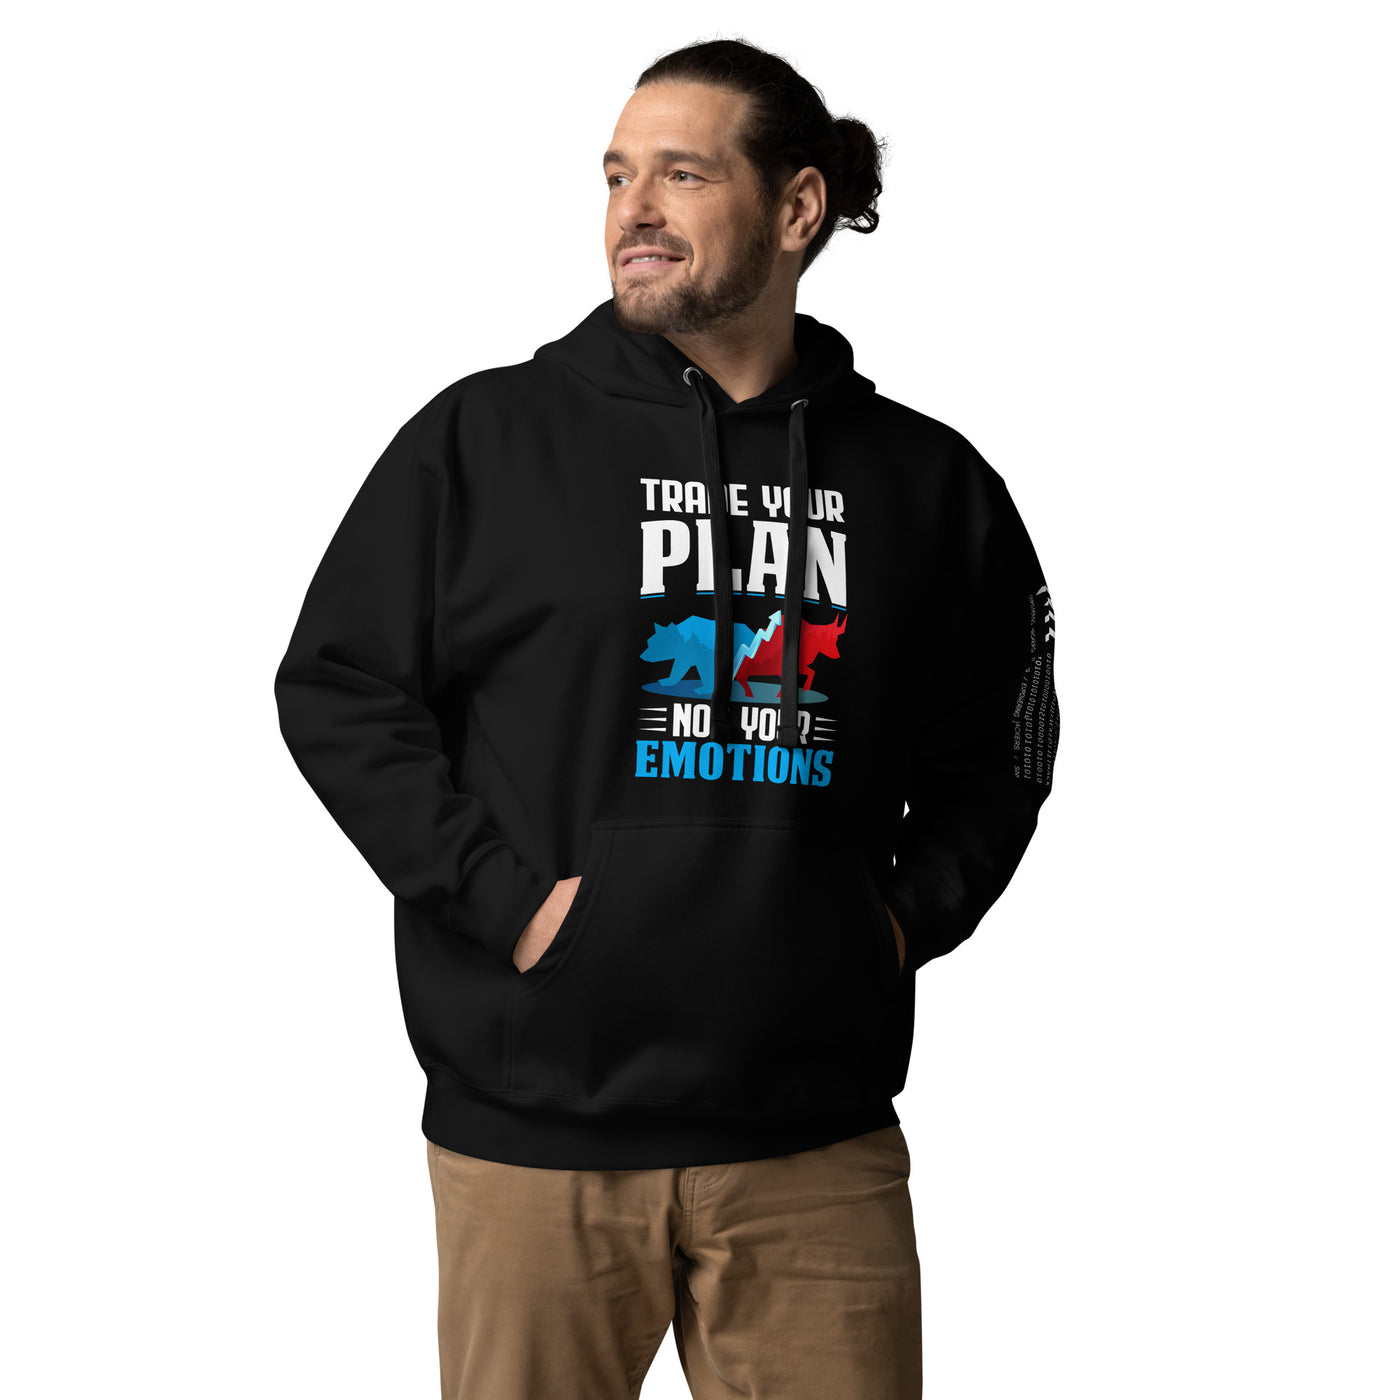 Trade your plan: not your emotion - Unisex Hoodie